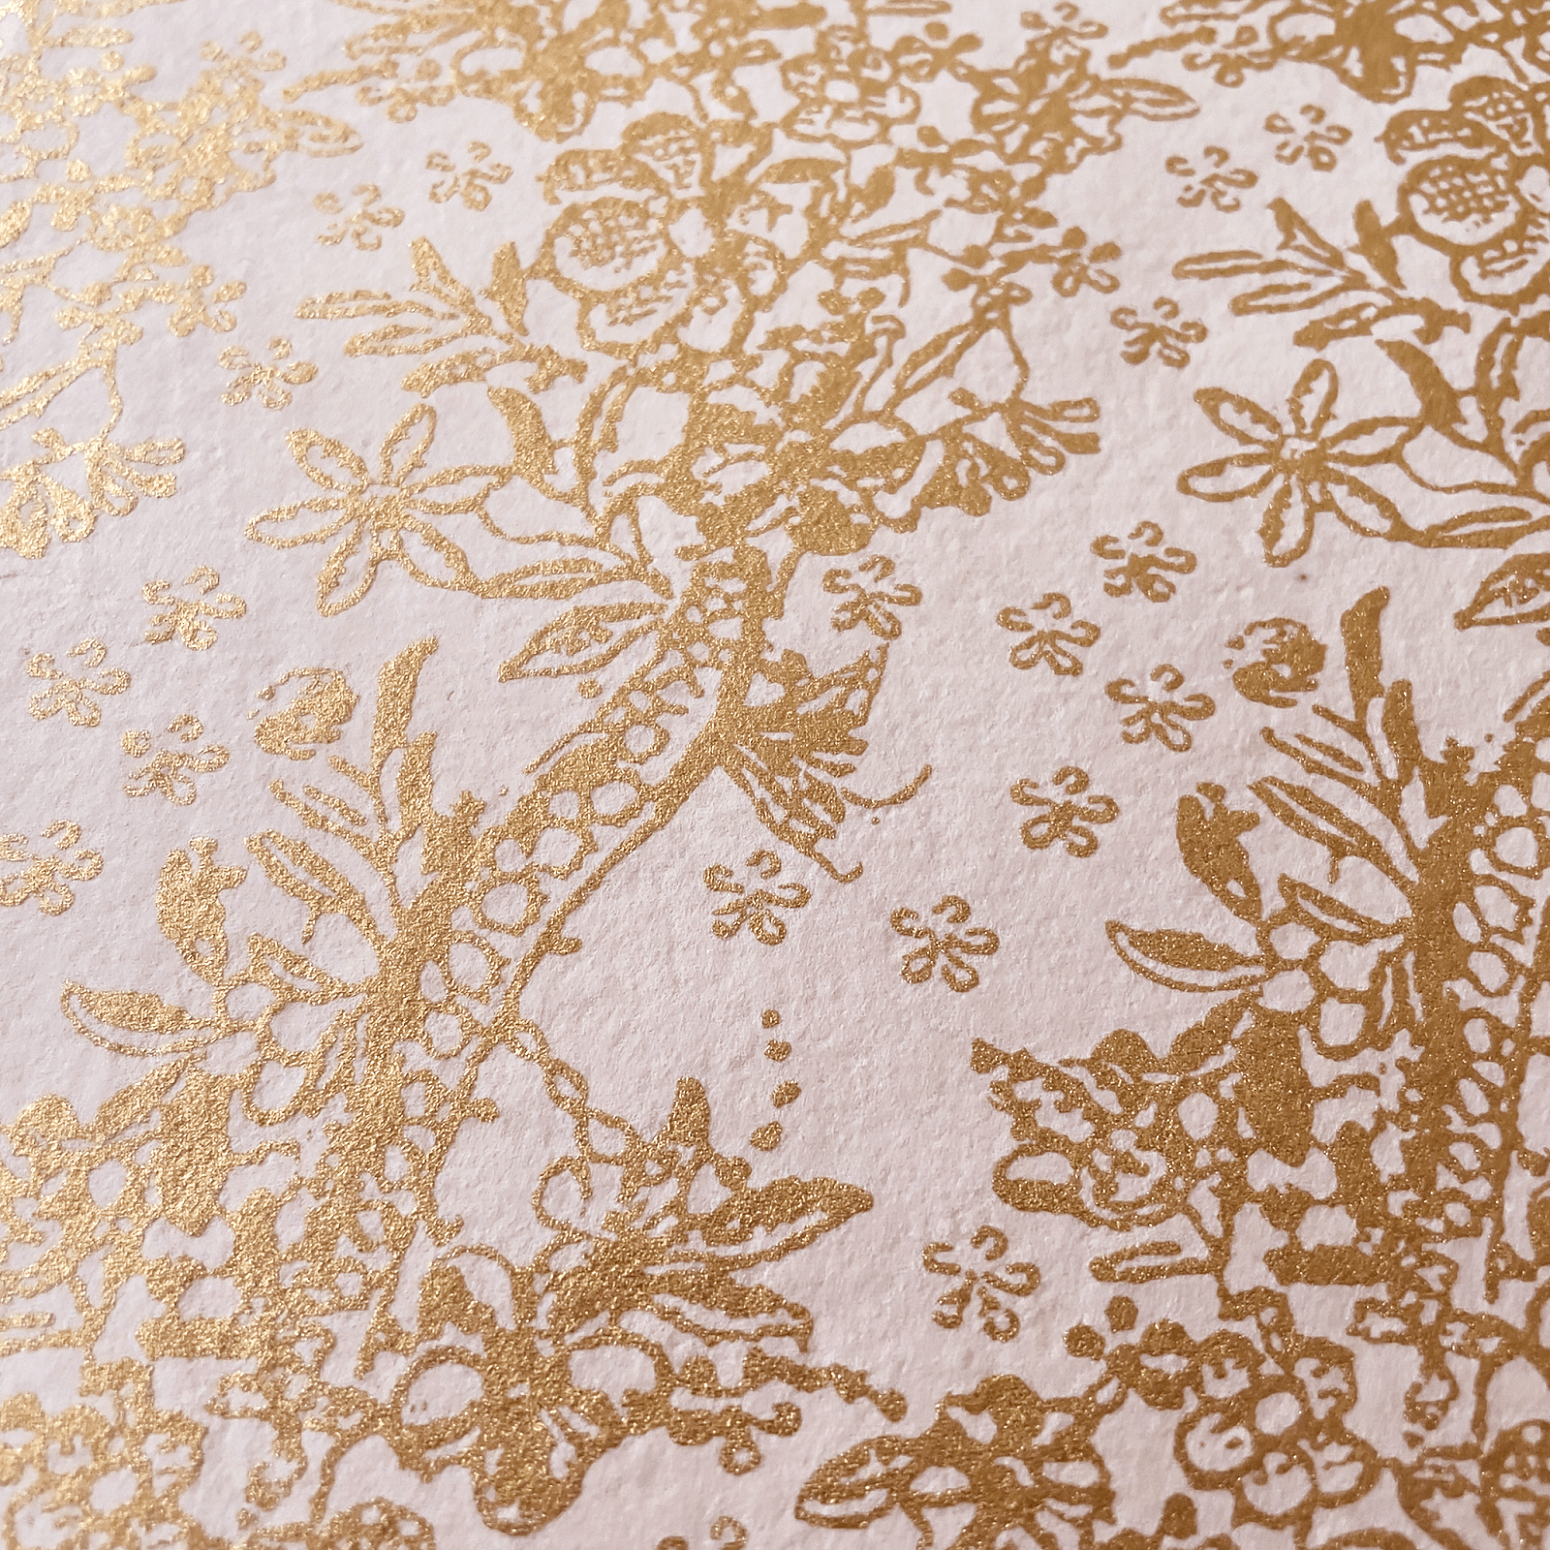 blush-pink-recycled-paper-with-floral-gold-pattern